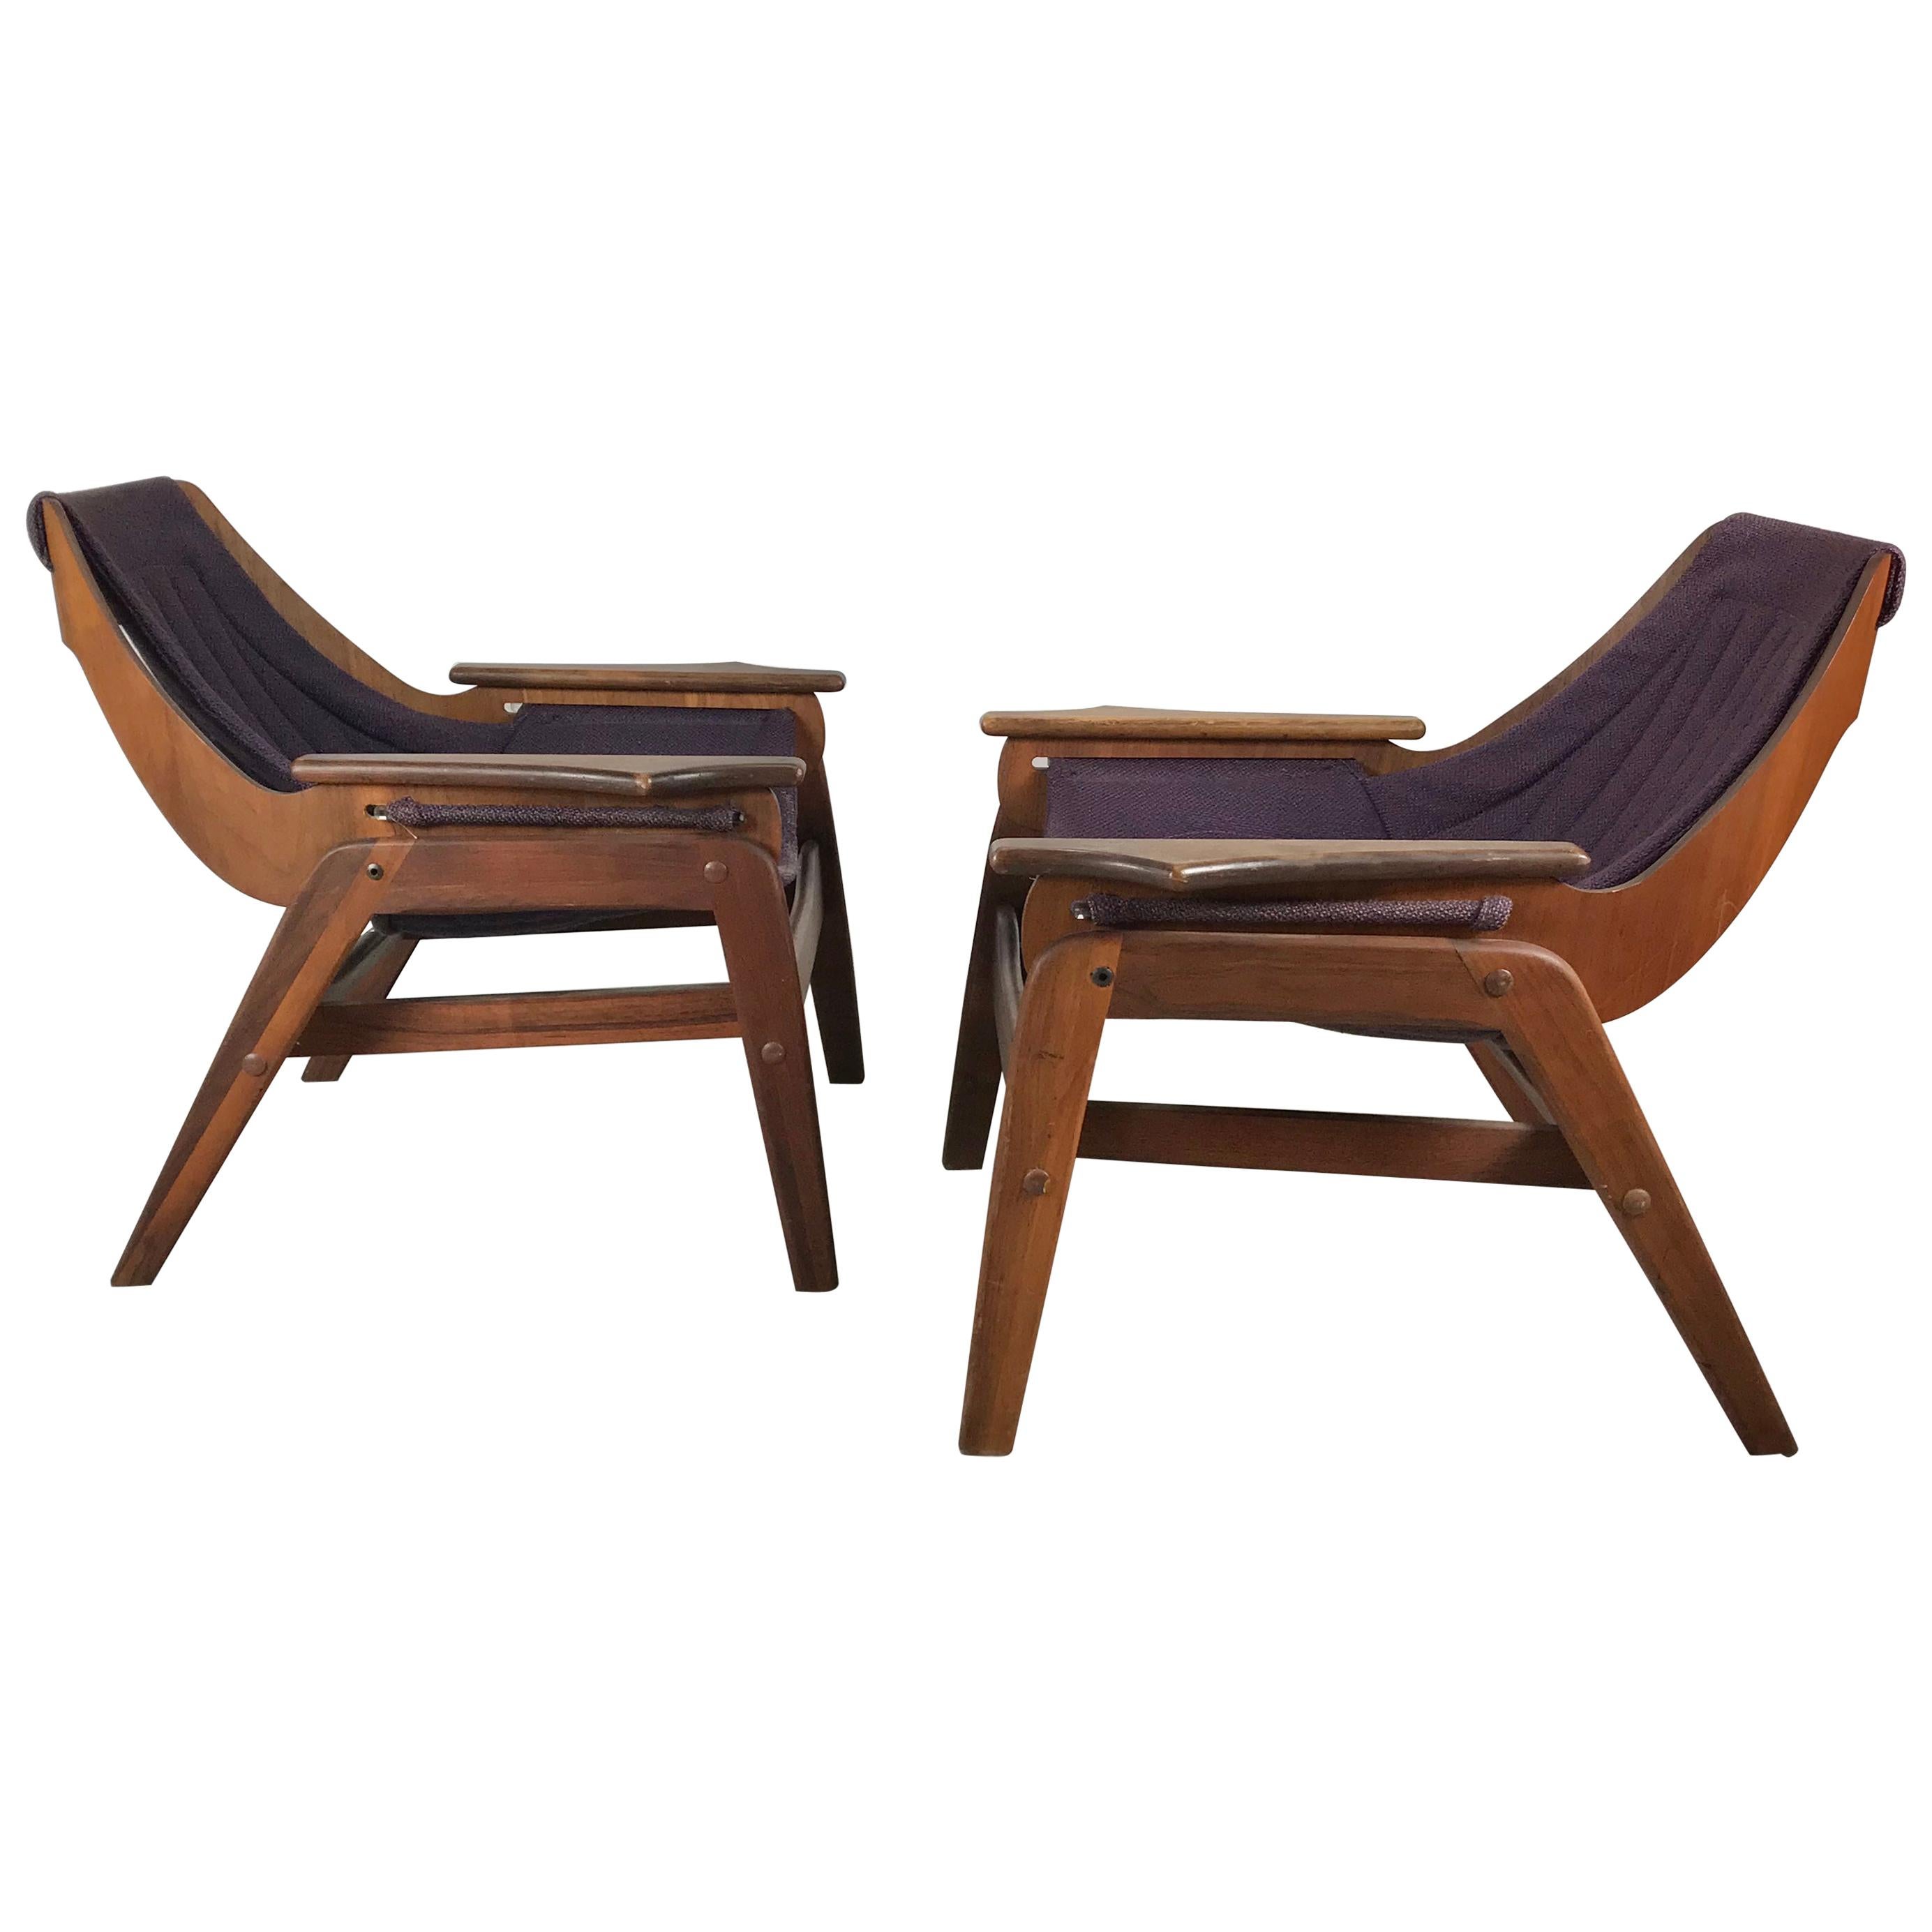 Mid-Century Modern Triumph I Sling Chairs by Jerry Johnson for Charlton